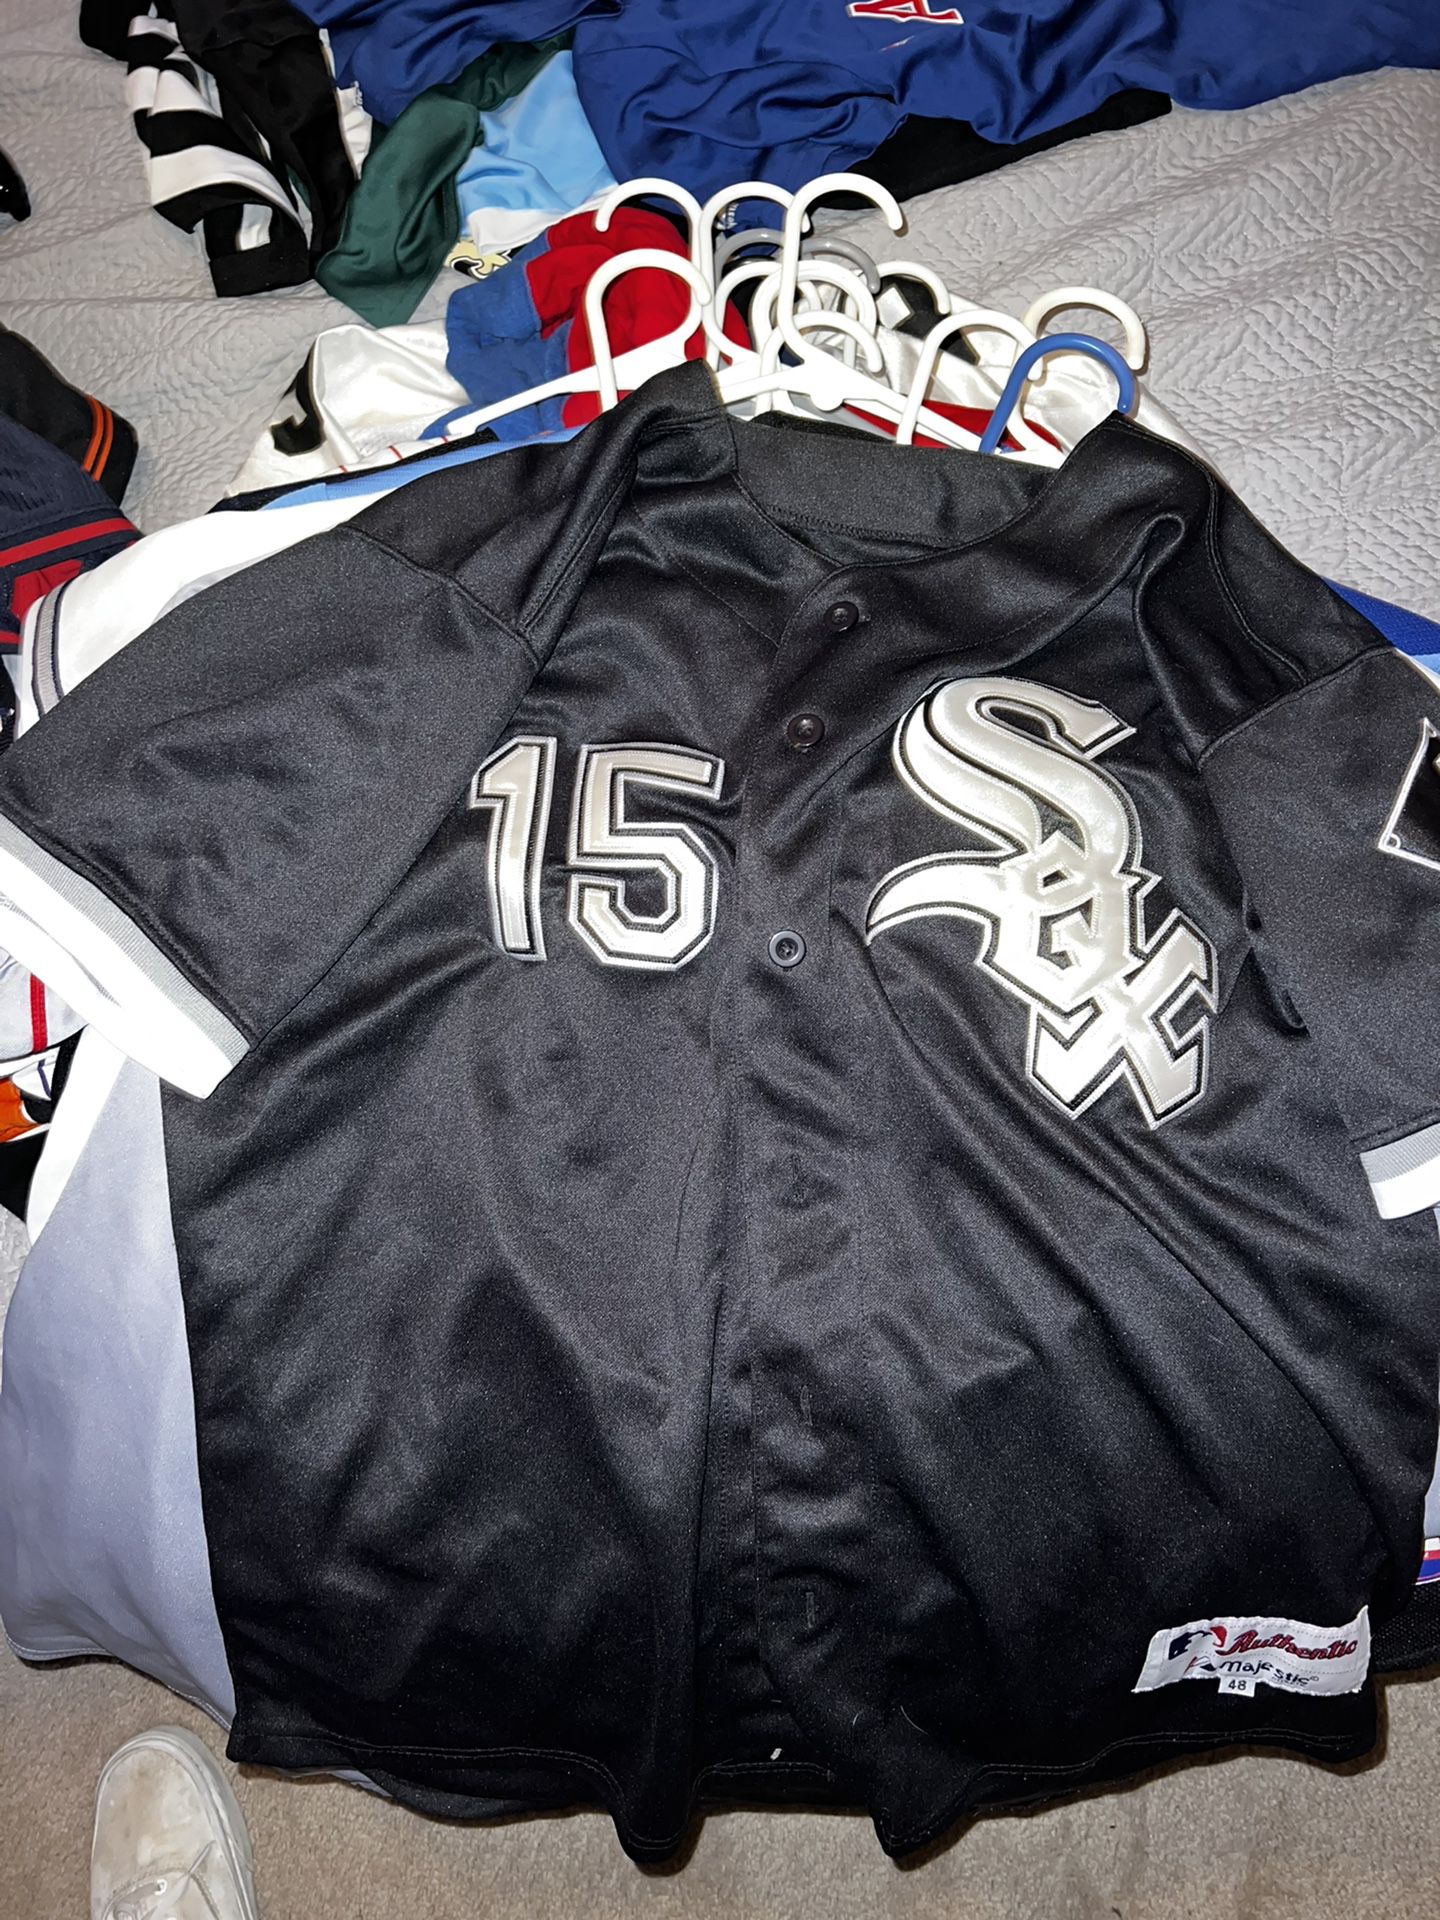 Mlb White Sox Jersey With embroidered patches 